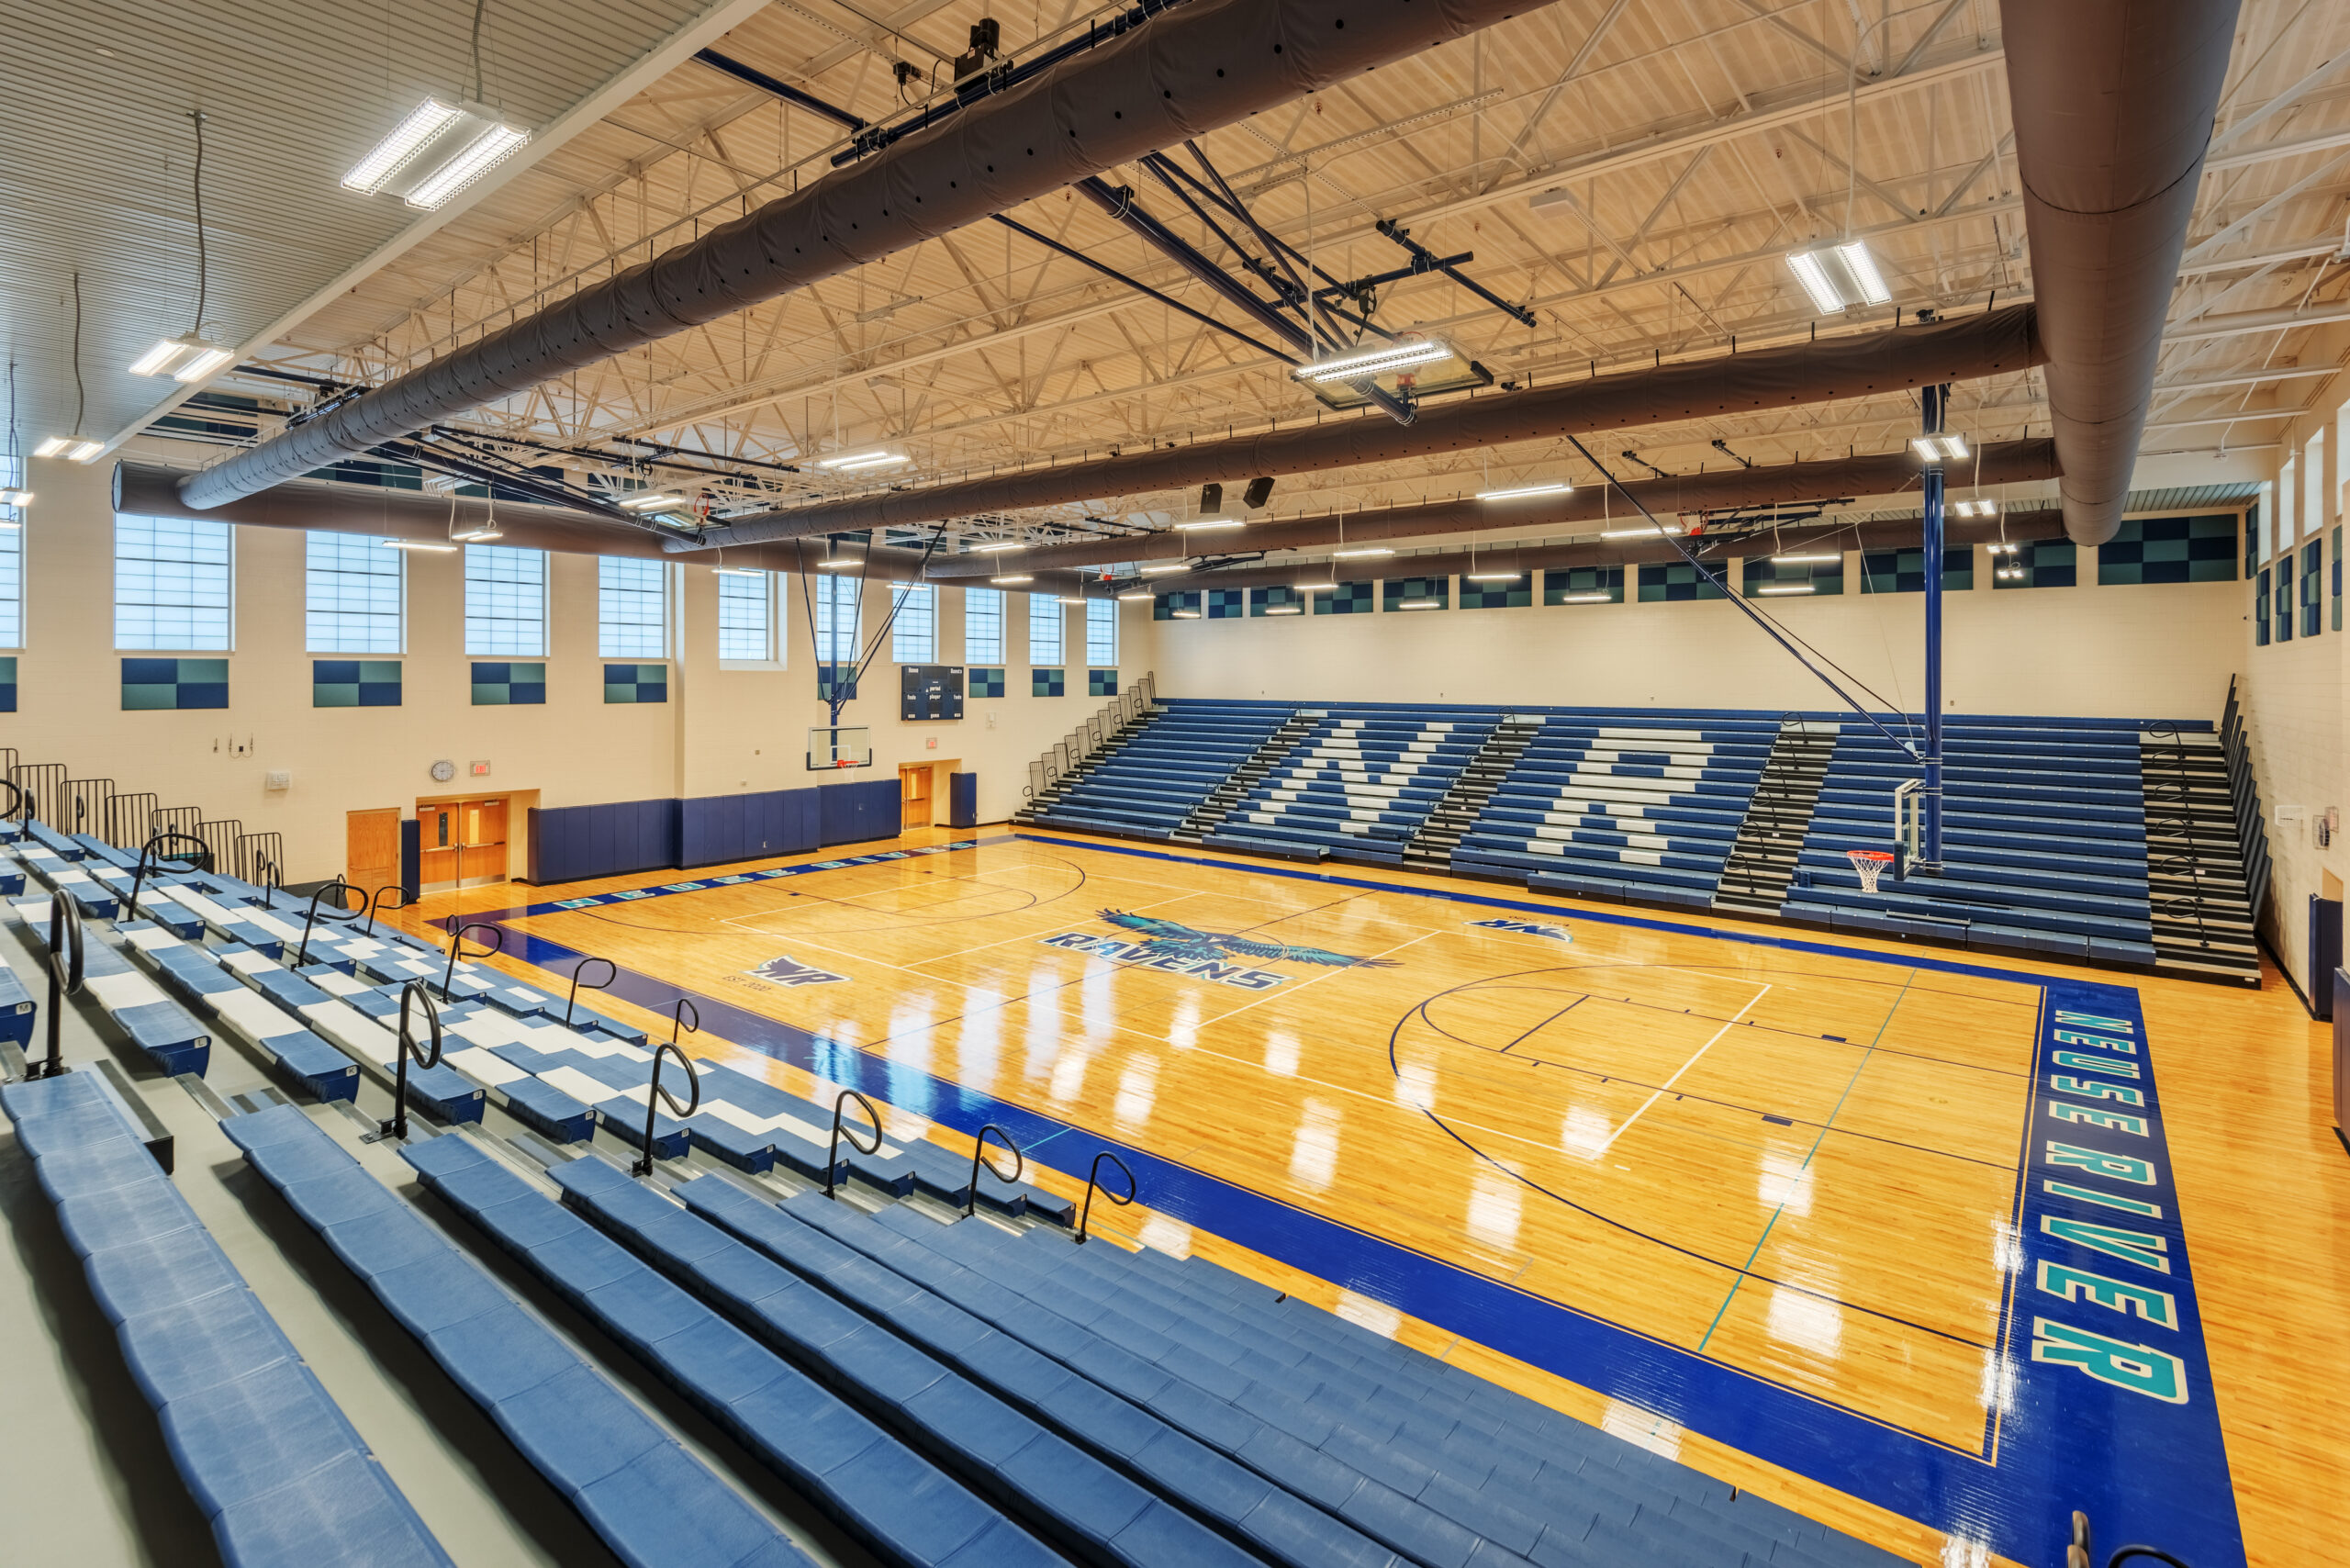 Neuse River Middle School Main Gym with Bleachers around Basketball Court